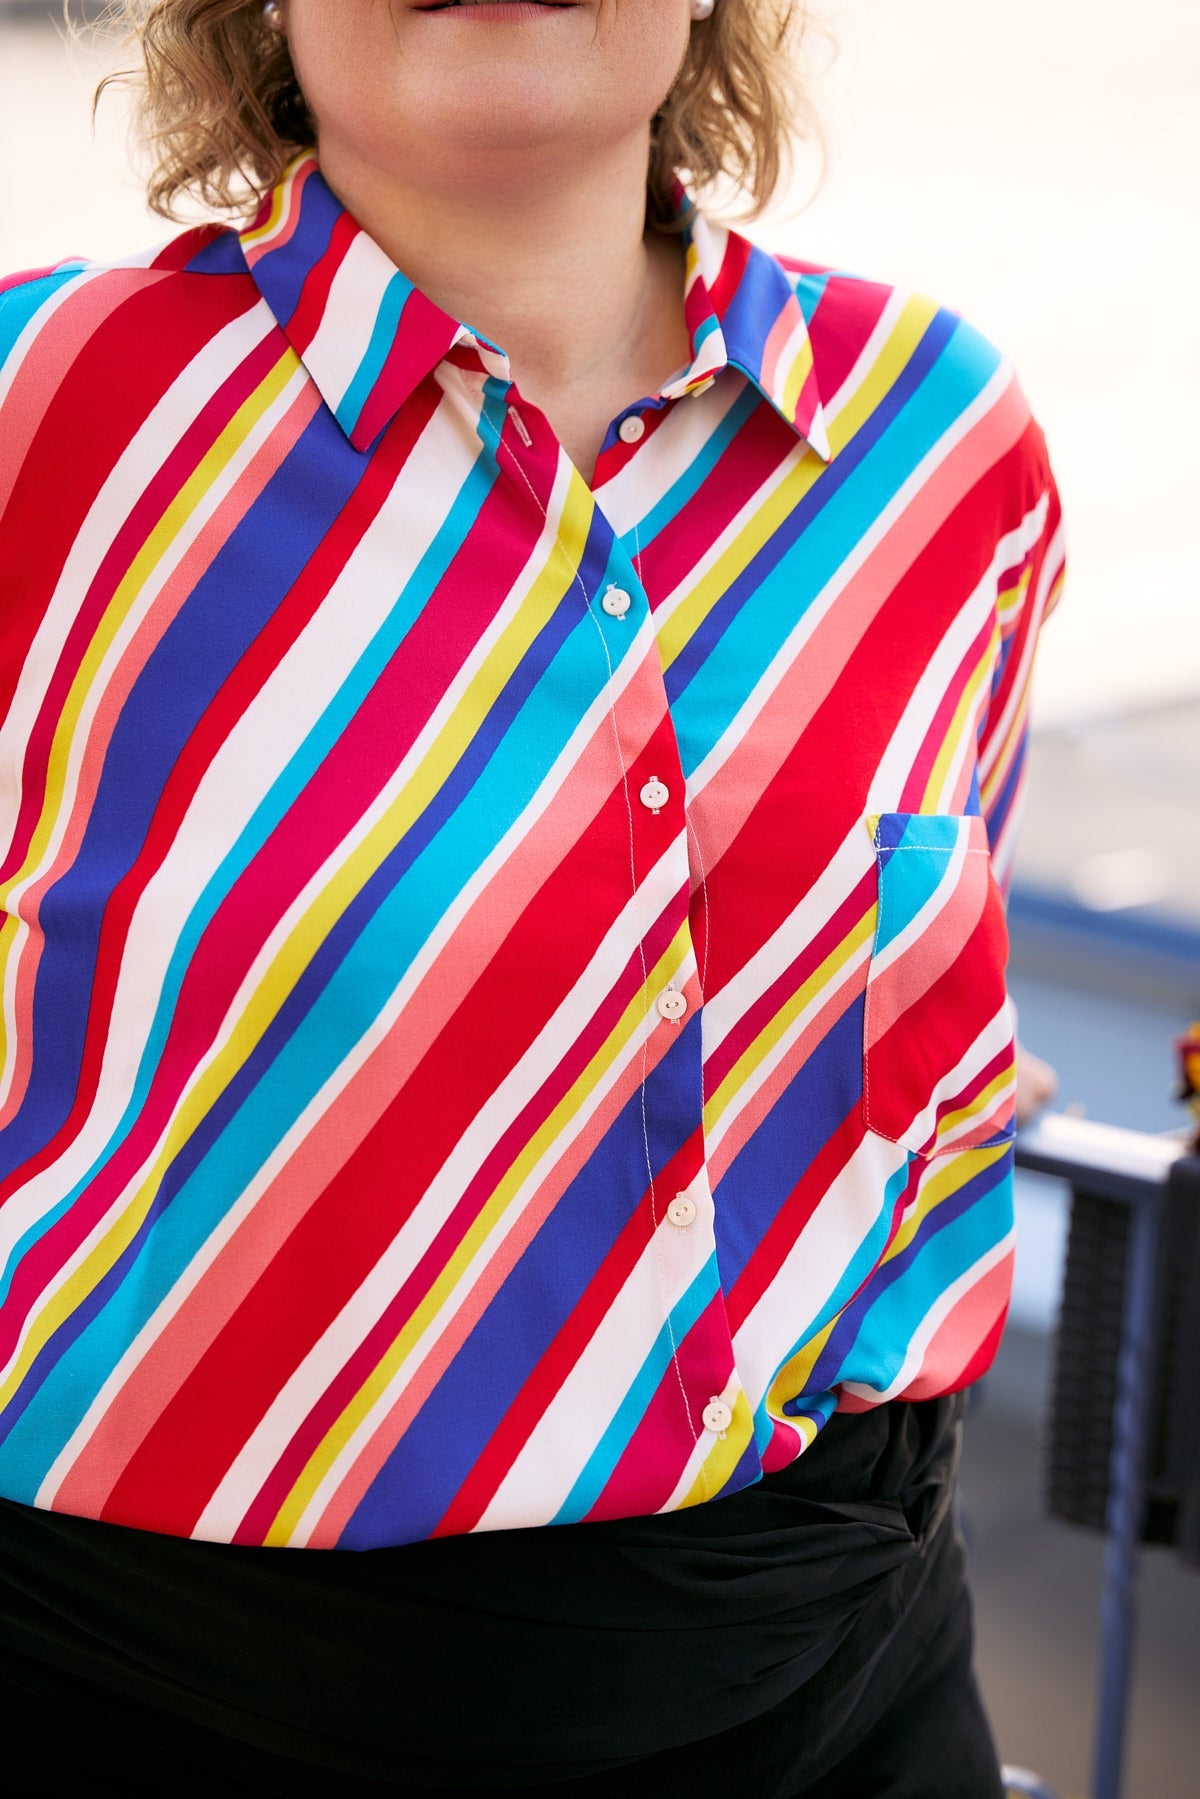 Bright pattern of comfortable and eco-friendly women's shirt.